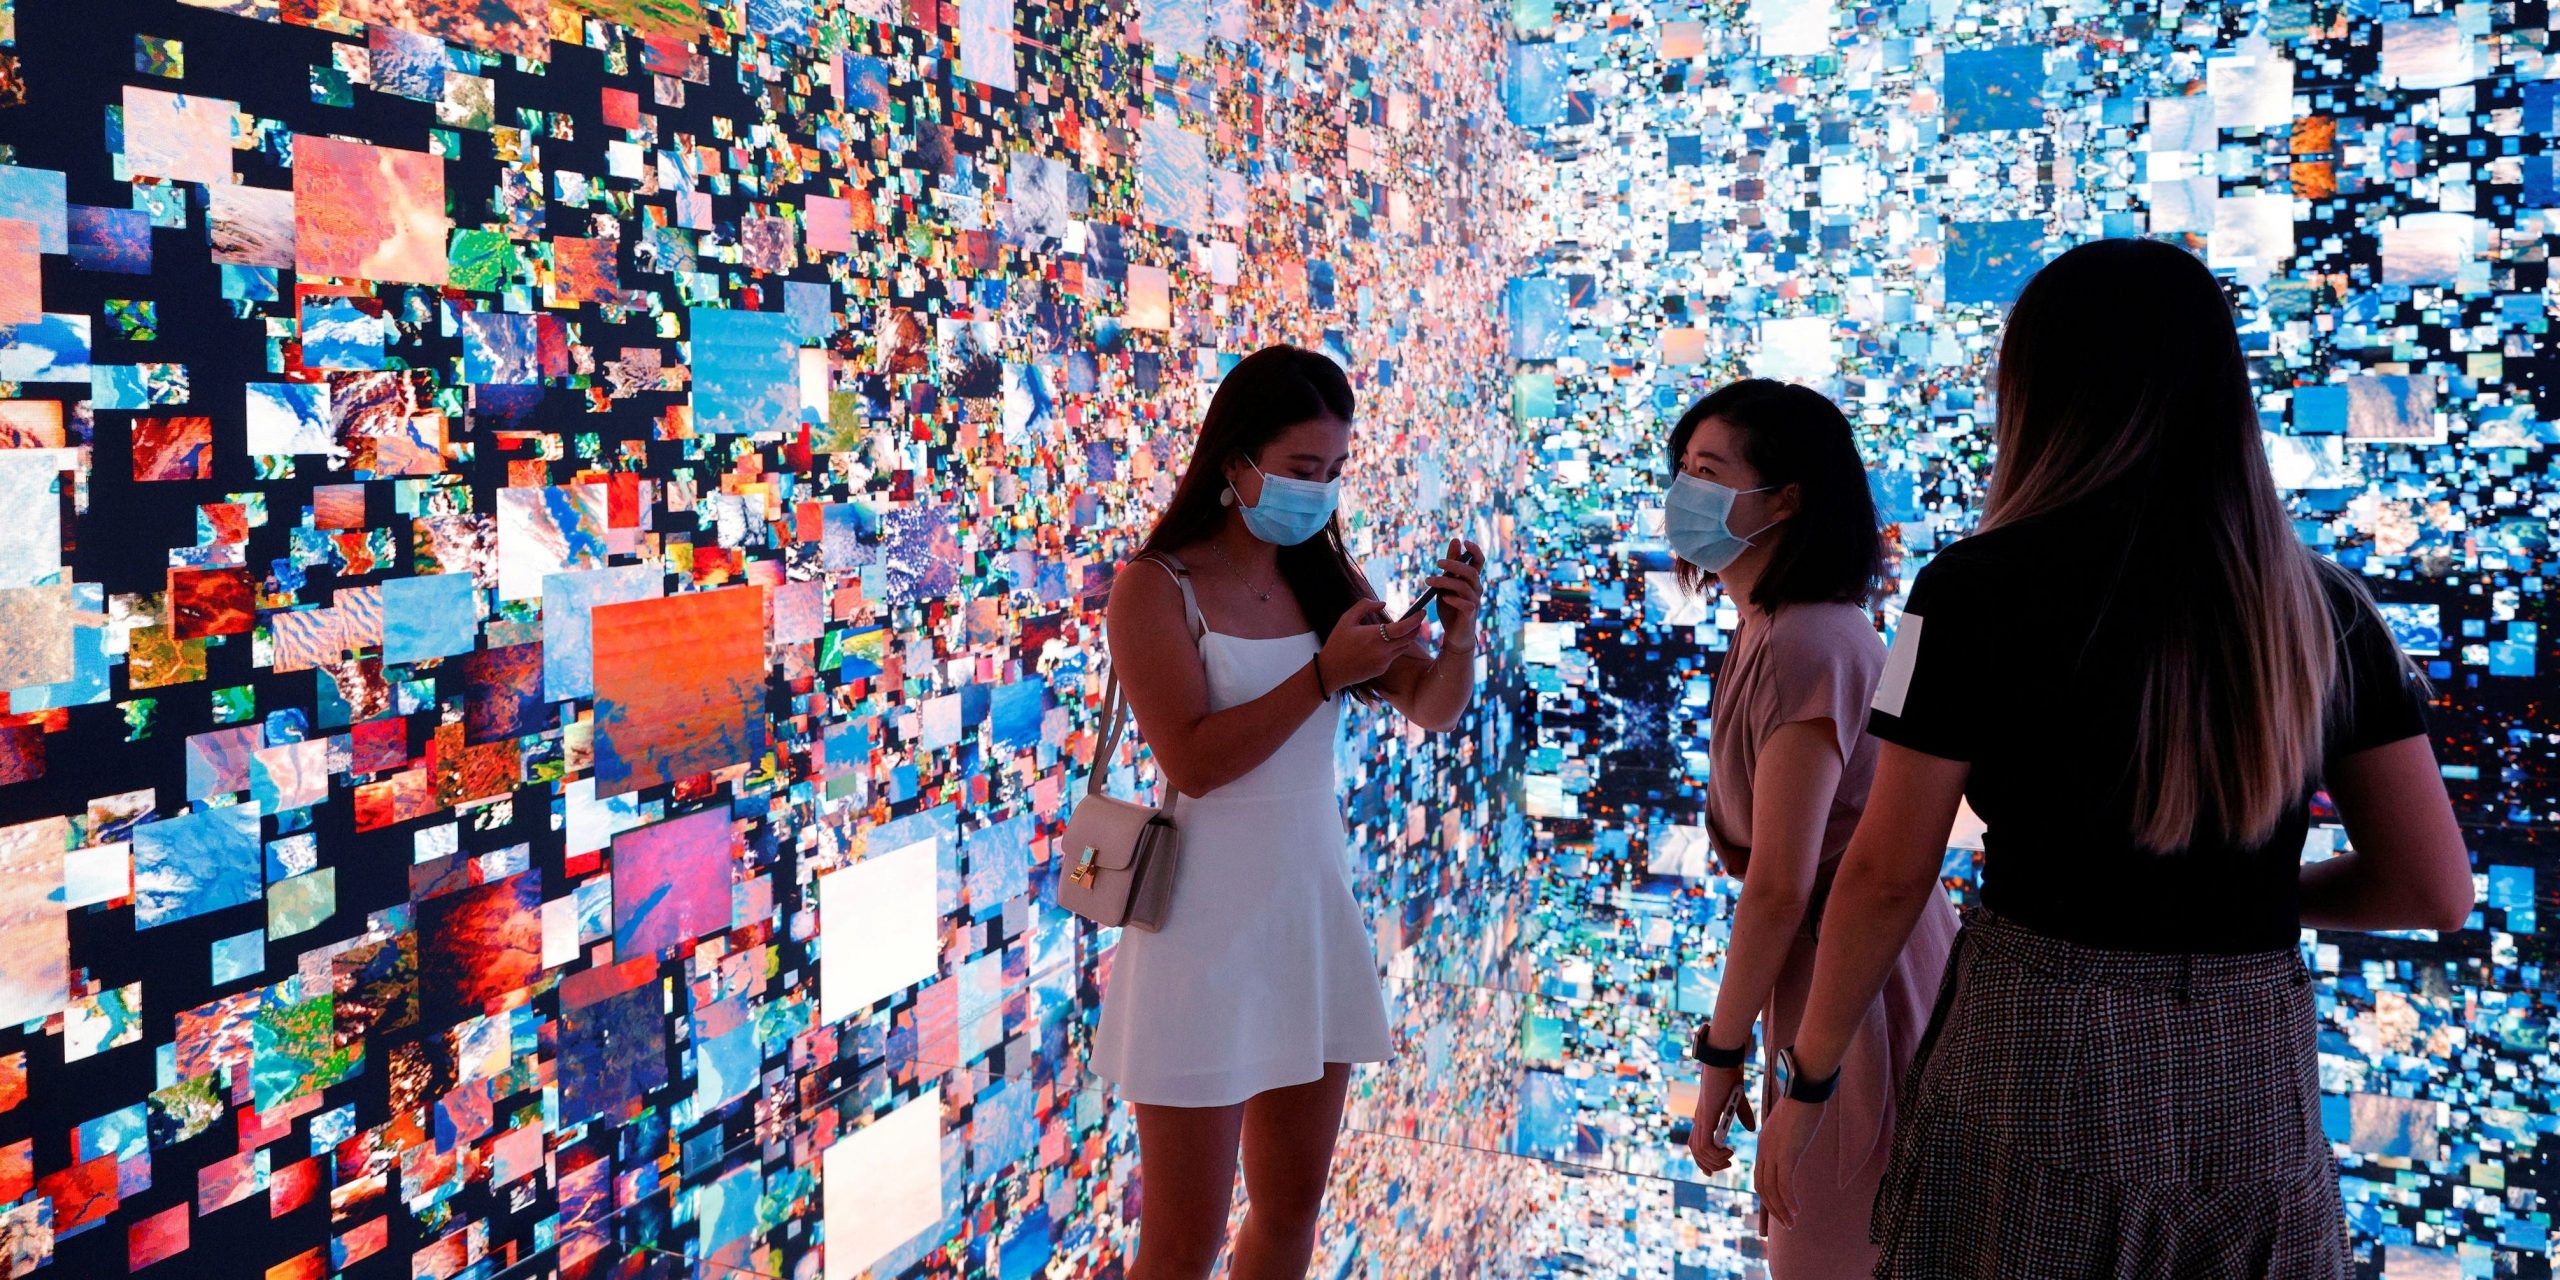 Visitors are pictured in front of an immersive art installation titled "Machine Hallucinations — Space: Metaverse" by media artist Refik Anadol.